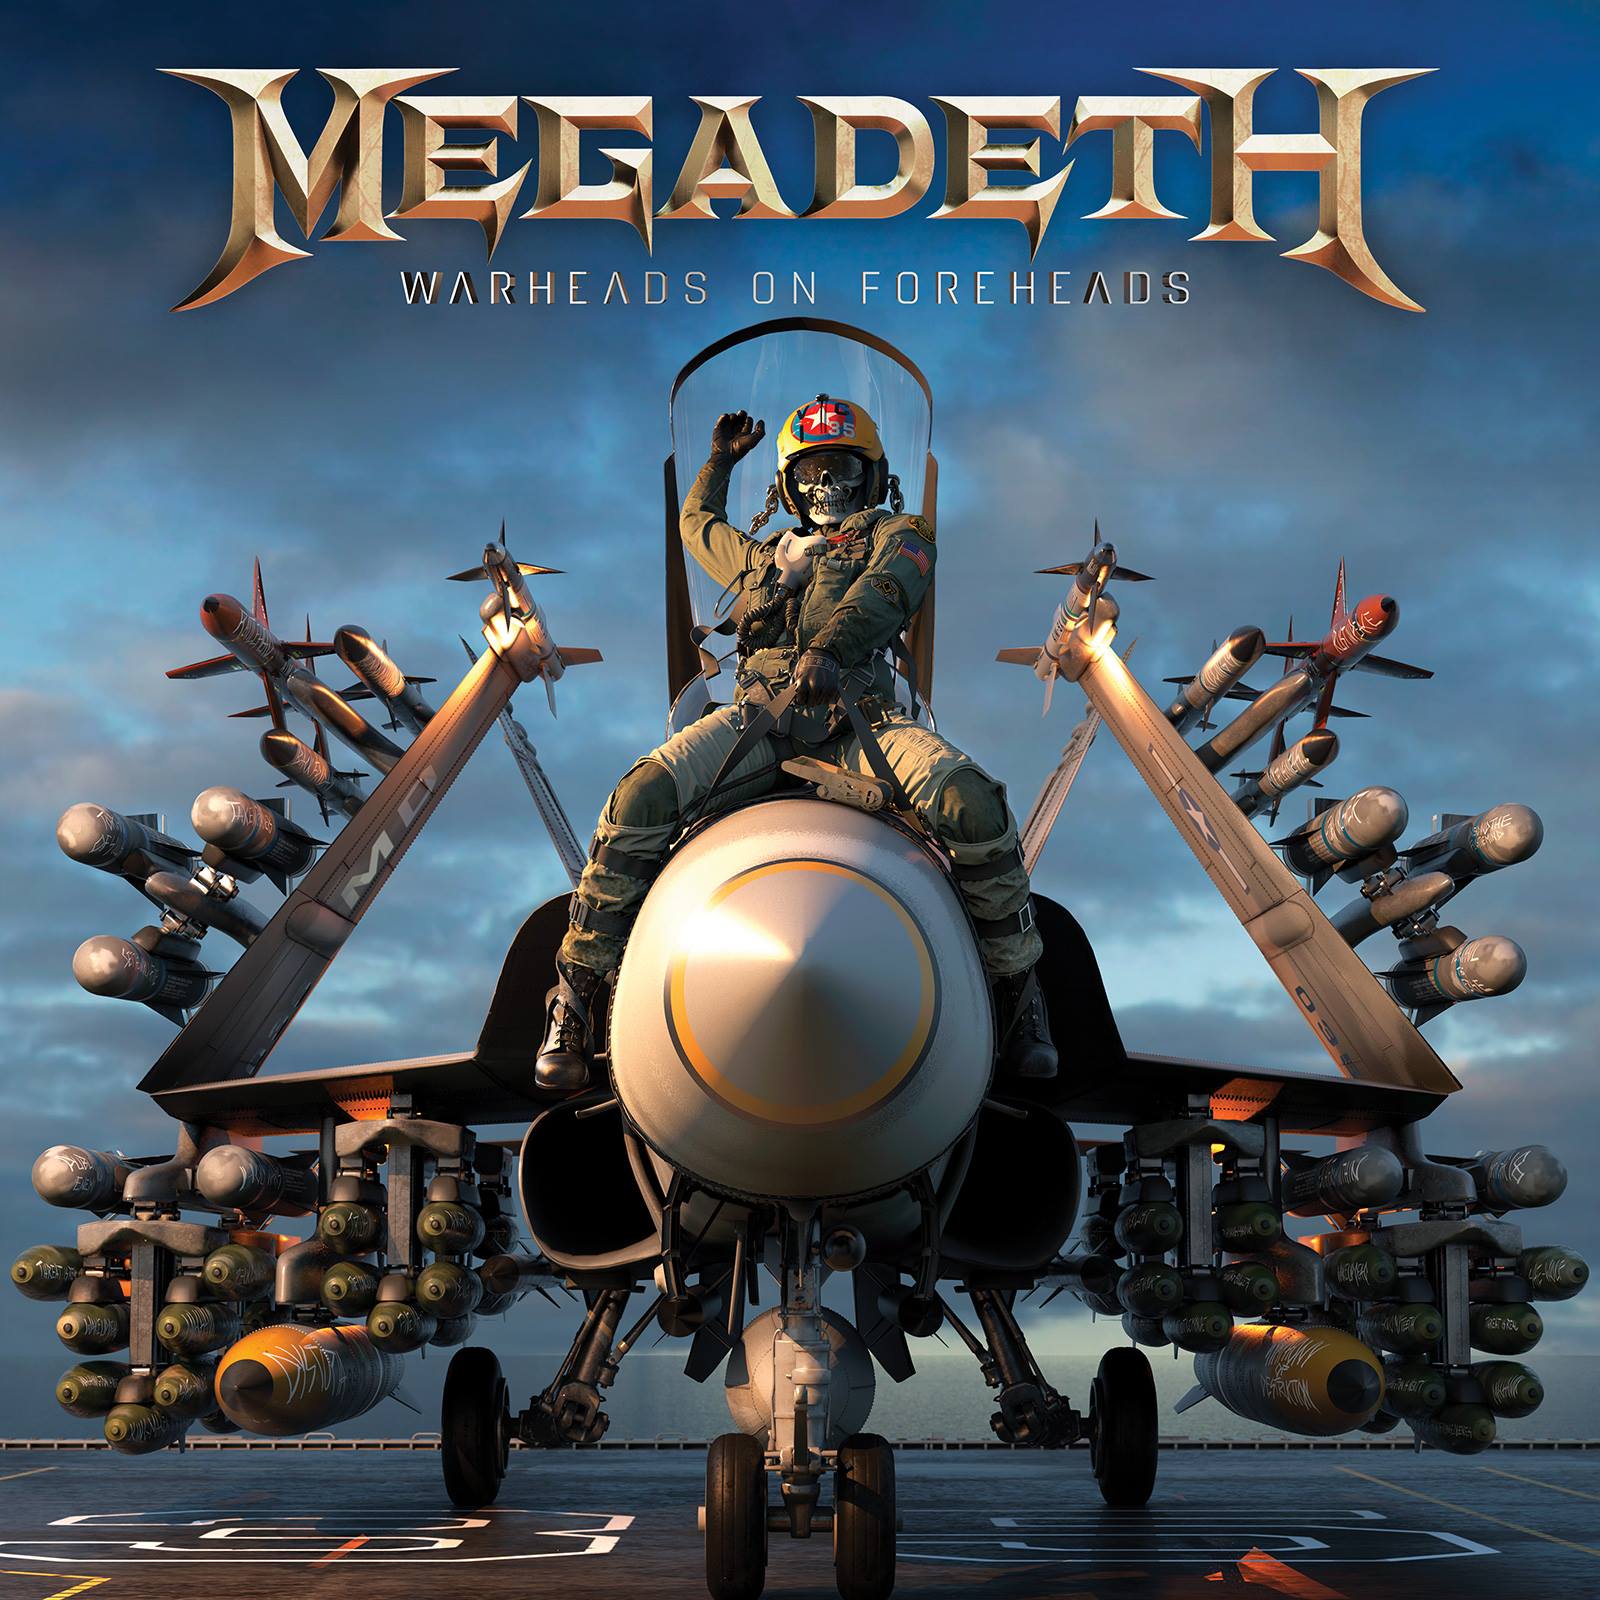 Megadeth reveal track listing for 35th Anniversary greatest hits album ‘Warheads On Foreheads’